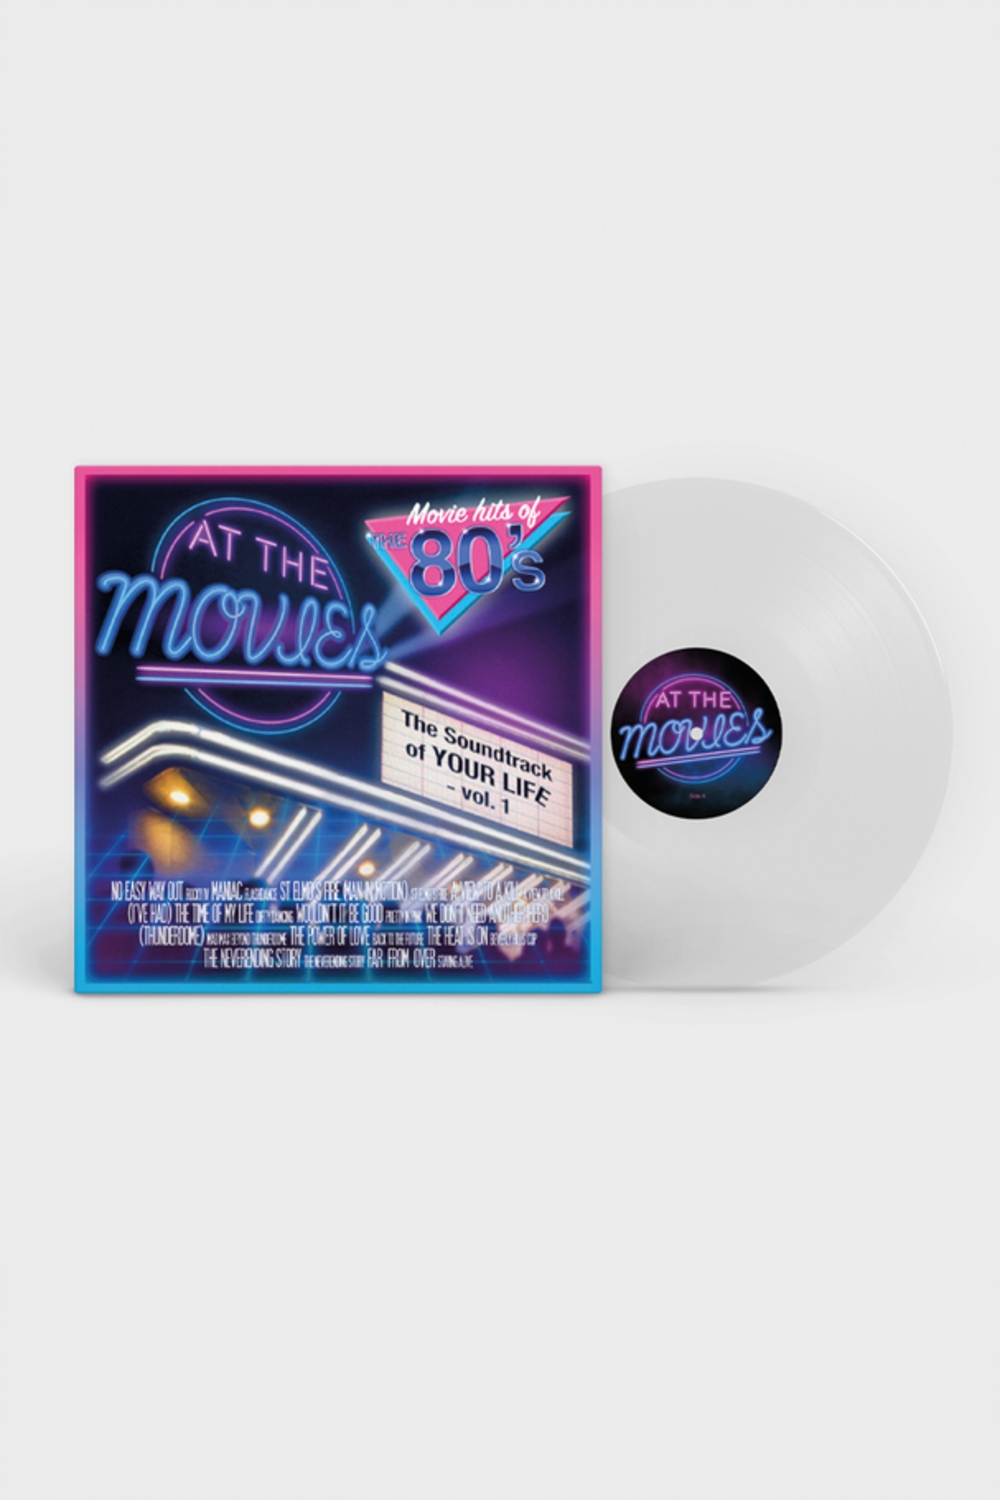 The soundtrack of your life - Vol. 1 CLEAR VINYL